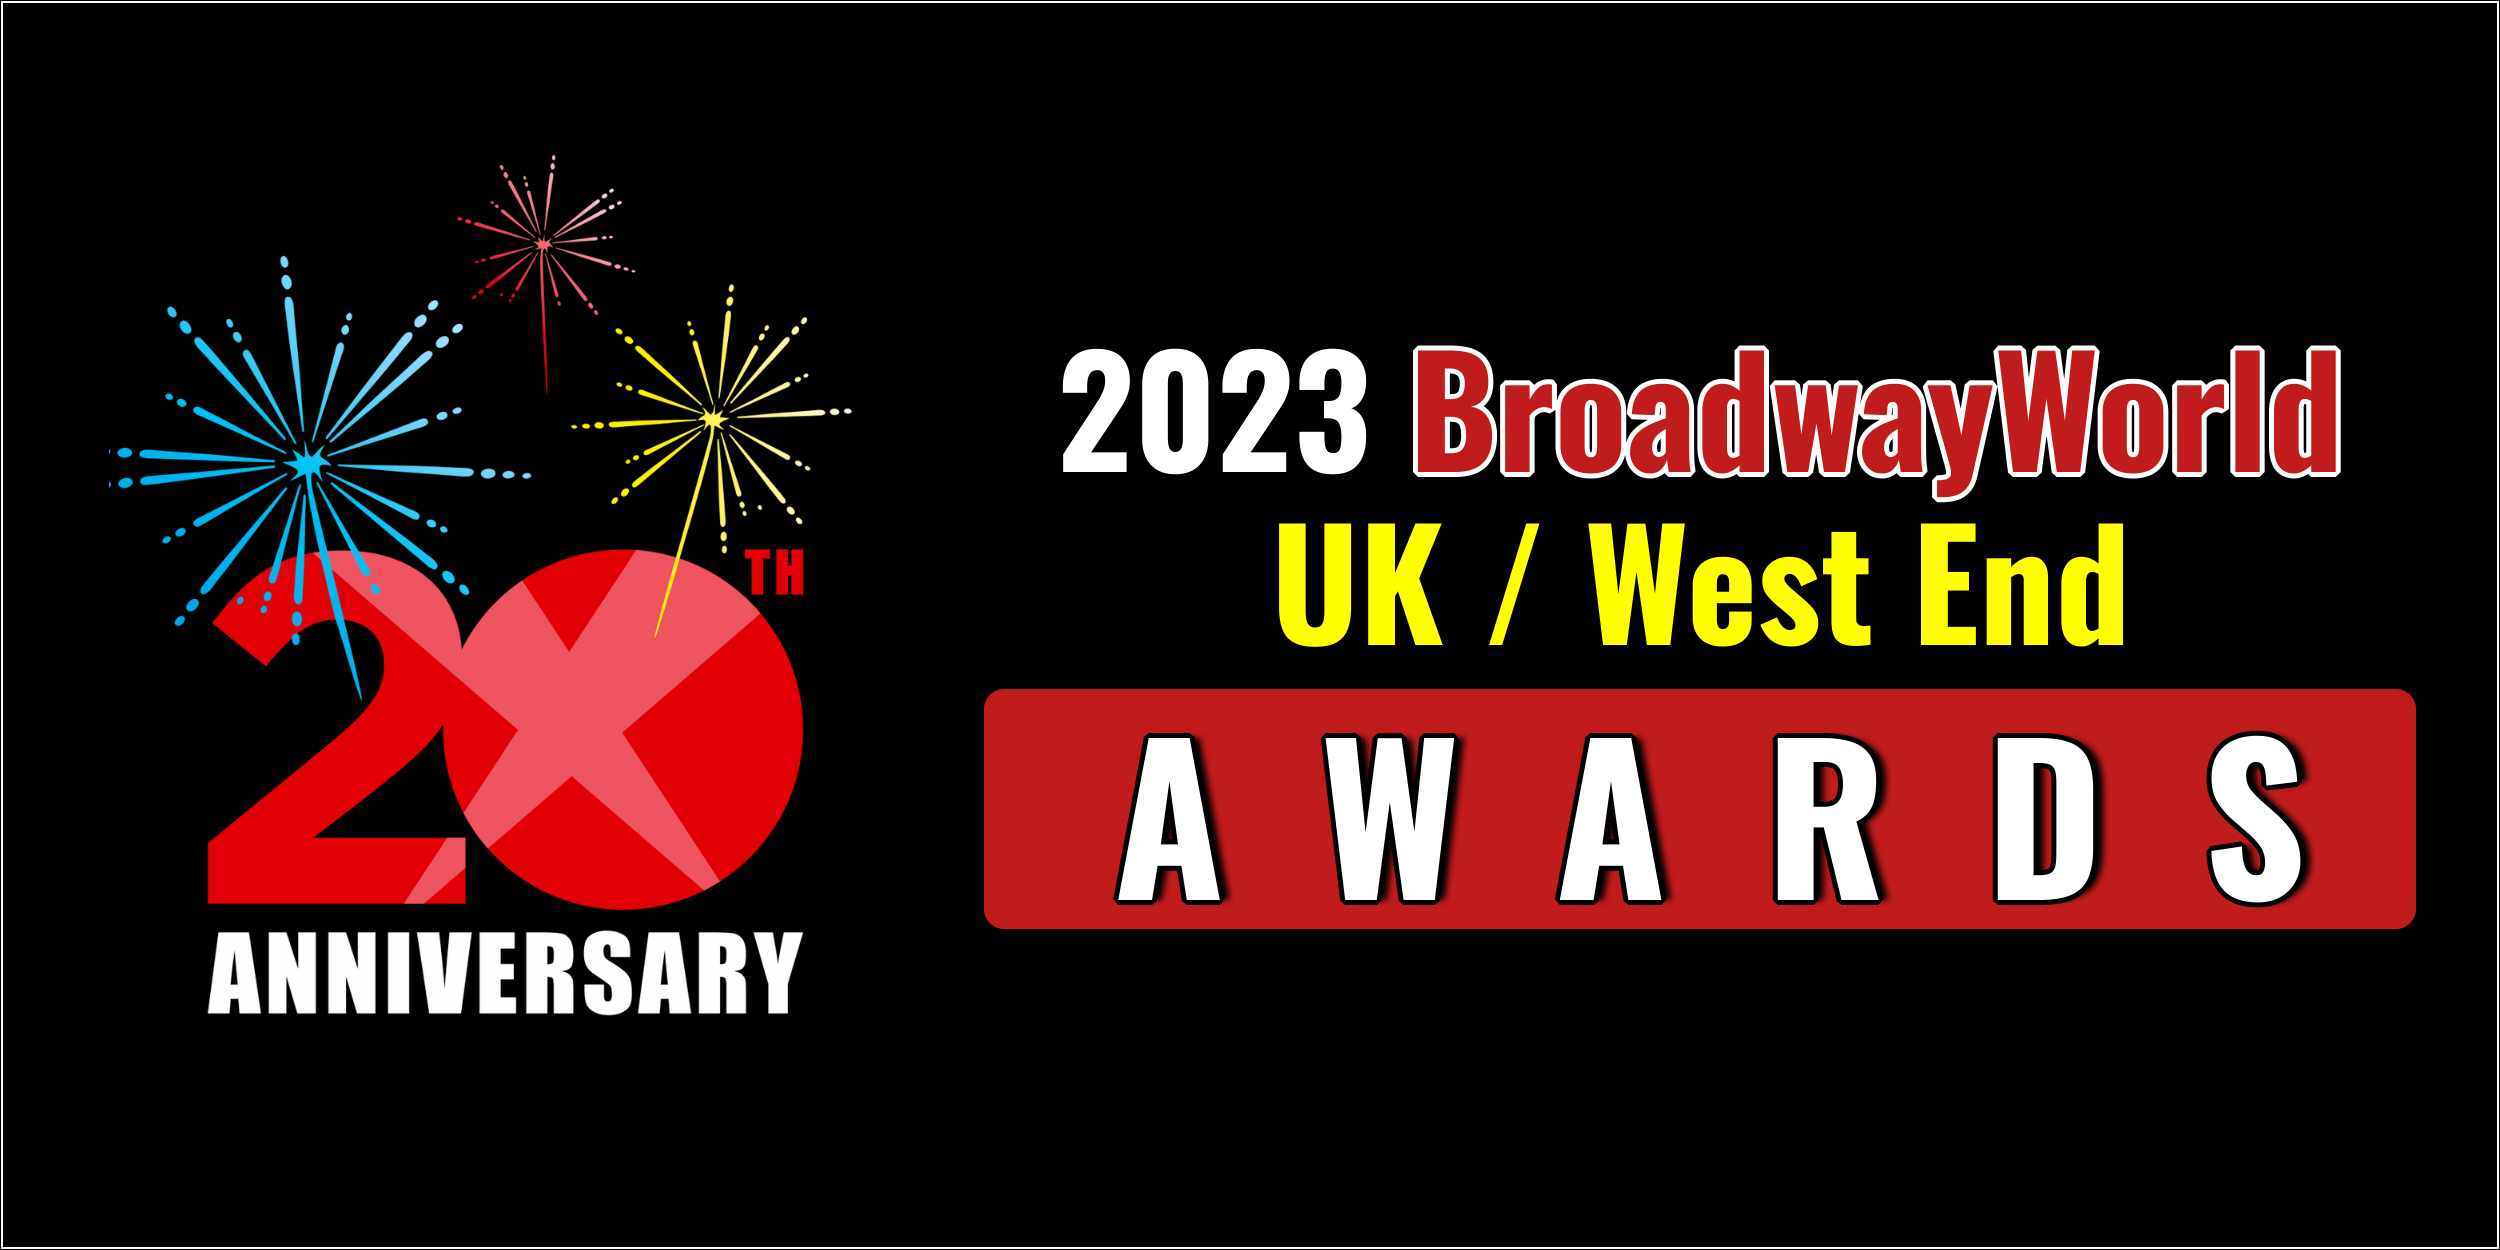 Latest Standings Announced For The 2023 BroadwayWorld UK / West End Awards; Leads Favorite Local Theatre!